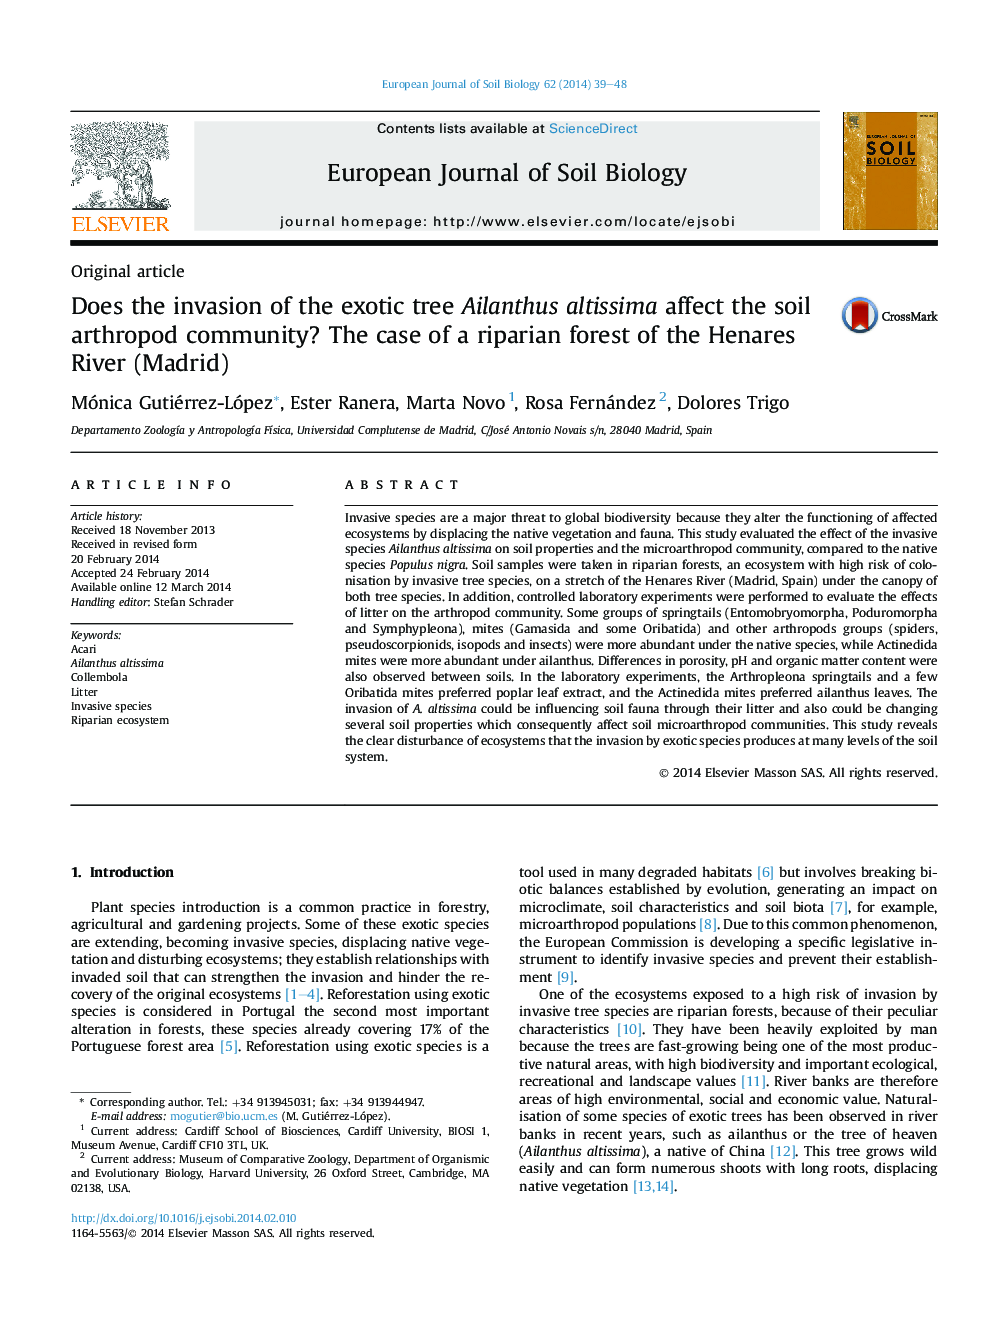 Does the invasion of the exotic tree Ailanthus altissima affect the soil arthropod community? The case of a riparian forest of the Henares River (Madrid)